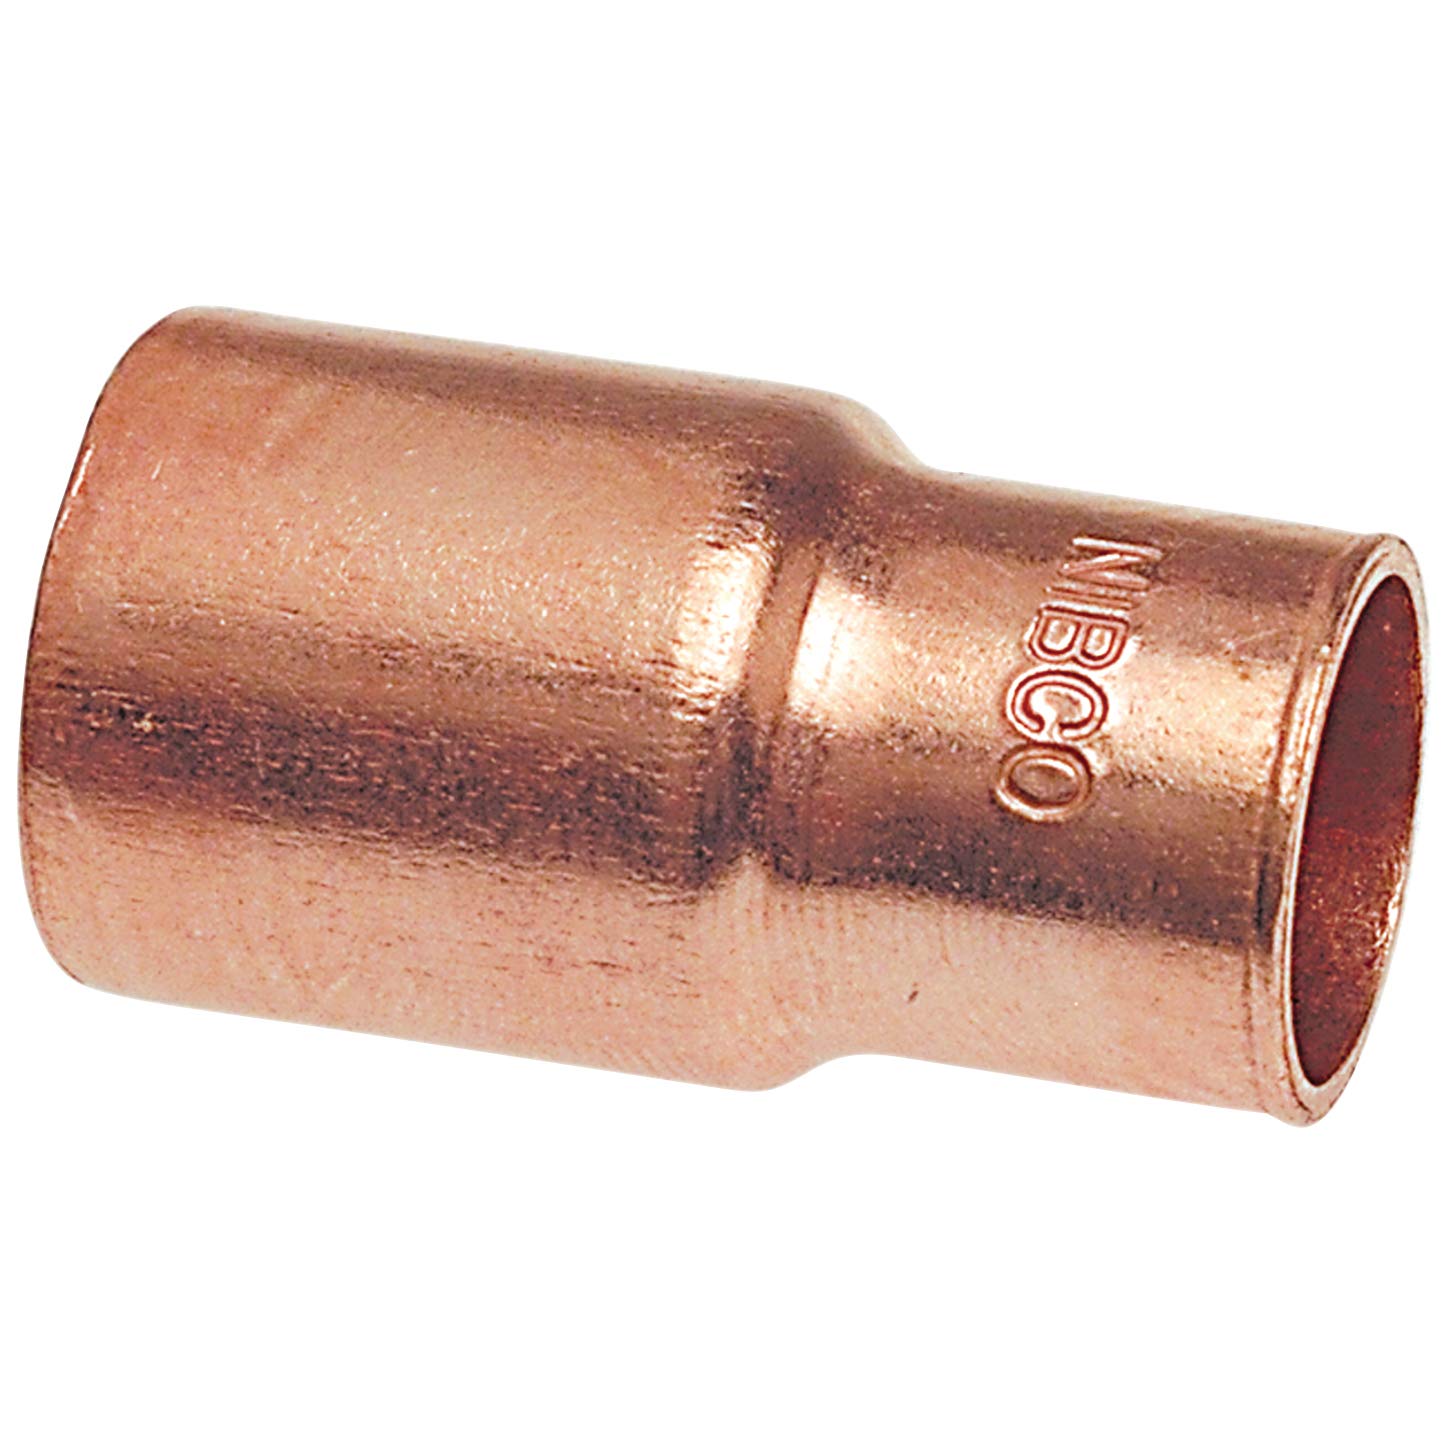 2" x 3/4" Fitting Reducer Ftg x C - Wrot Copper, 600-2